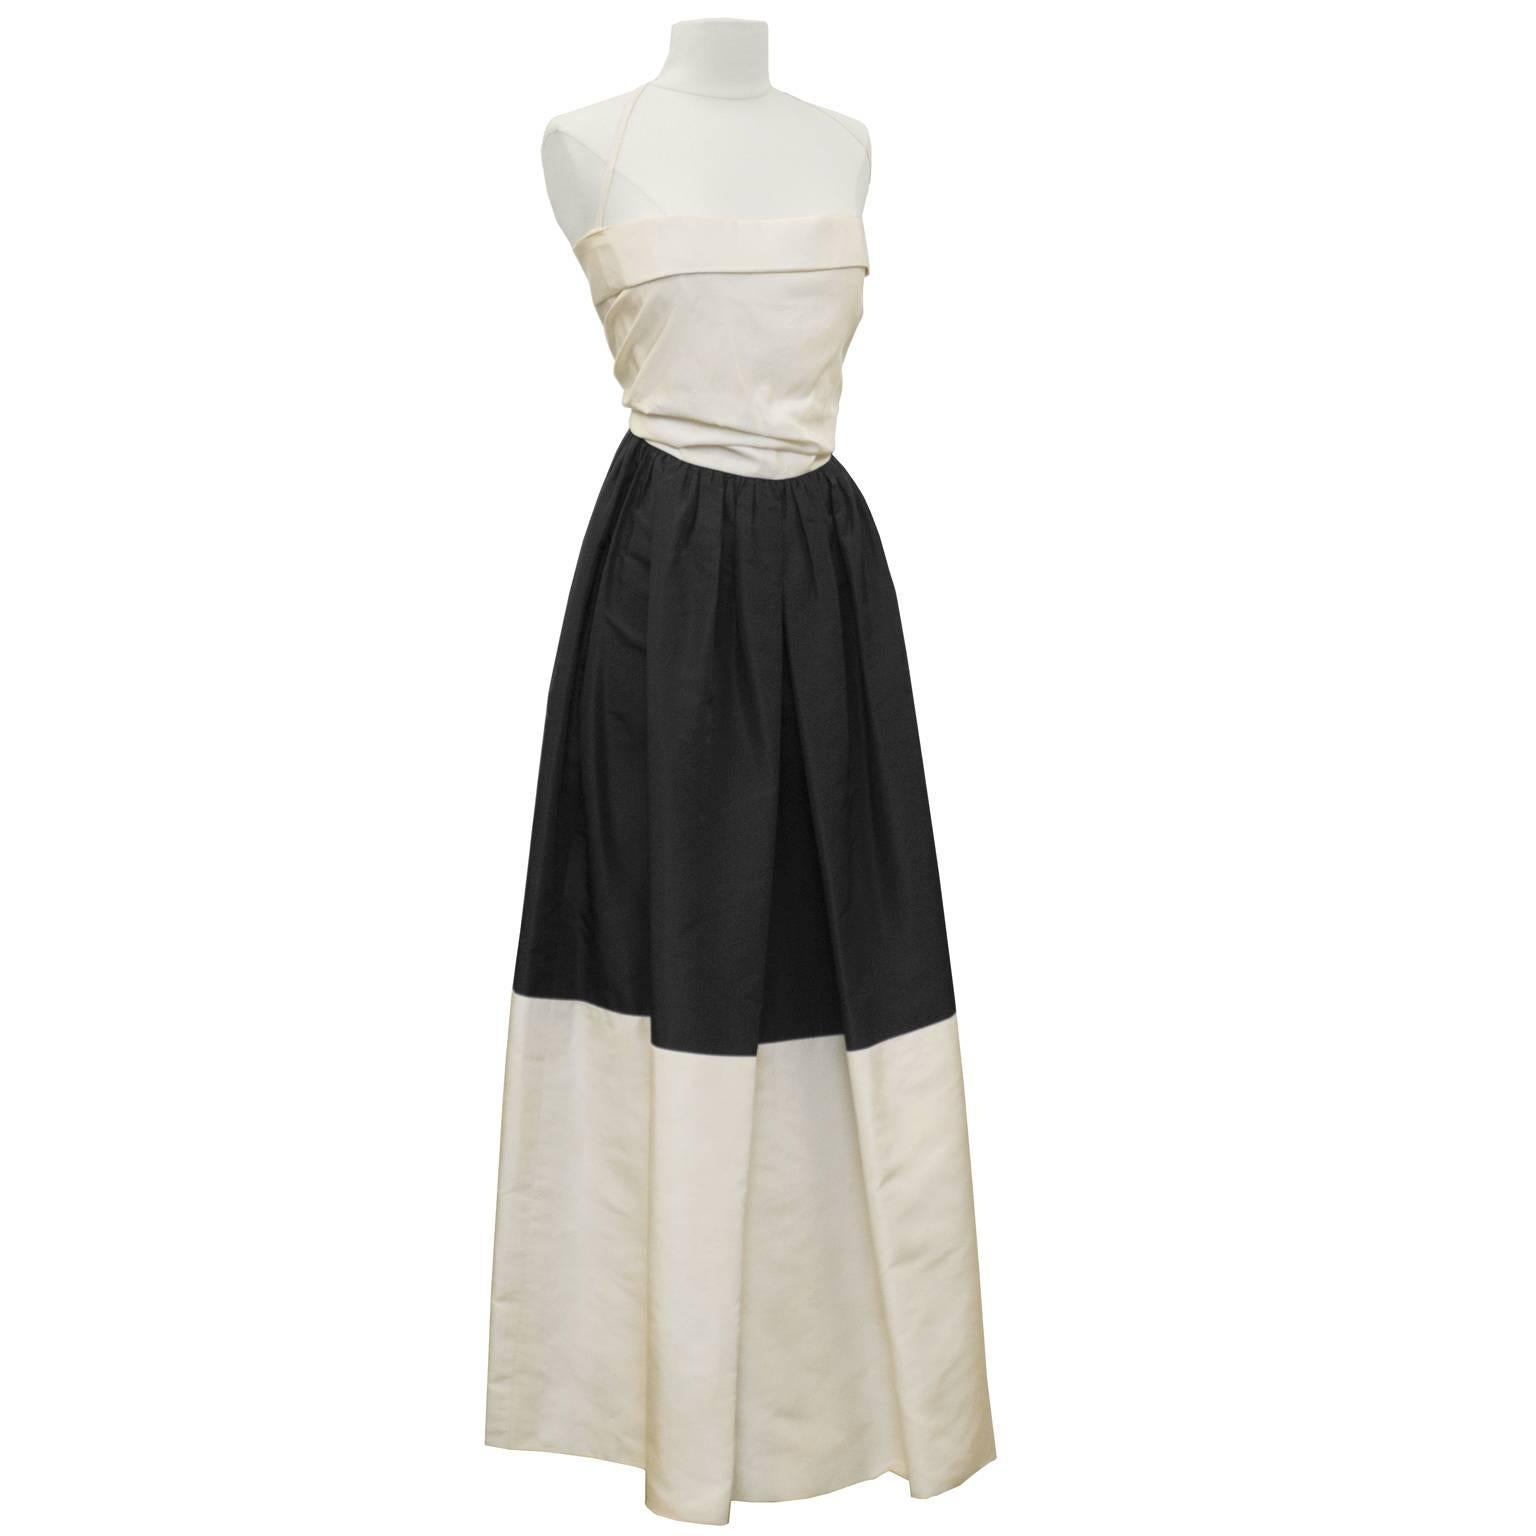 Elegant early 1960's black and cream silk taffeta strapless gown by Pauline Trigere. The gown is colorblocked with a cream bodice, black top skirt and cream hem. The top of the bodice has a single fold all around and there is a halter style strap